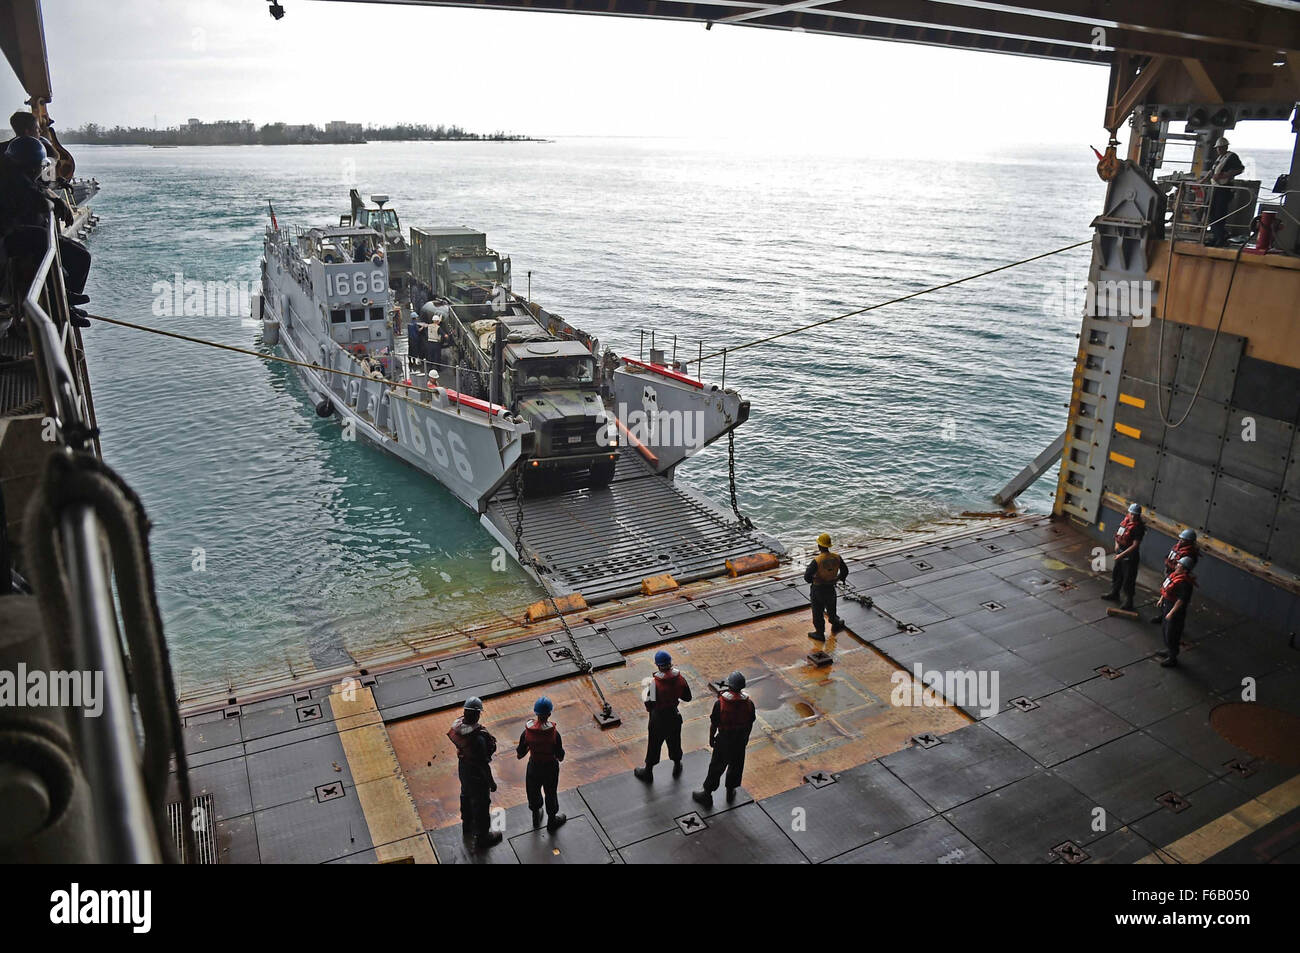 150808-N-KM939-449 SAIPAN HARBOR, Saipan (Aug. 8, 2015) - Vehicles from the 31st Marine Expeditionary Unit (MEU) are unloaded from the well deck of the amphibious dock landing ship USS Ashland (LSD 48) via Landing Craft Utility vehicle during disaster relief efforts in Saipan after Typhoon Soudelor made landfall. Ashland is assigned to the Bonhomme Richard Expeditionary Strike Group and is on patrol in the U.S. 7th Fleet area of operations. Stock Photo